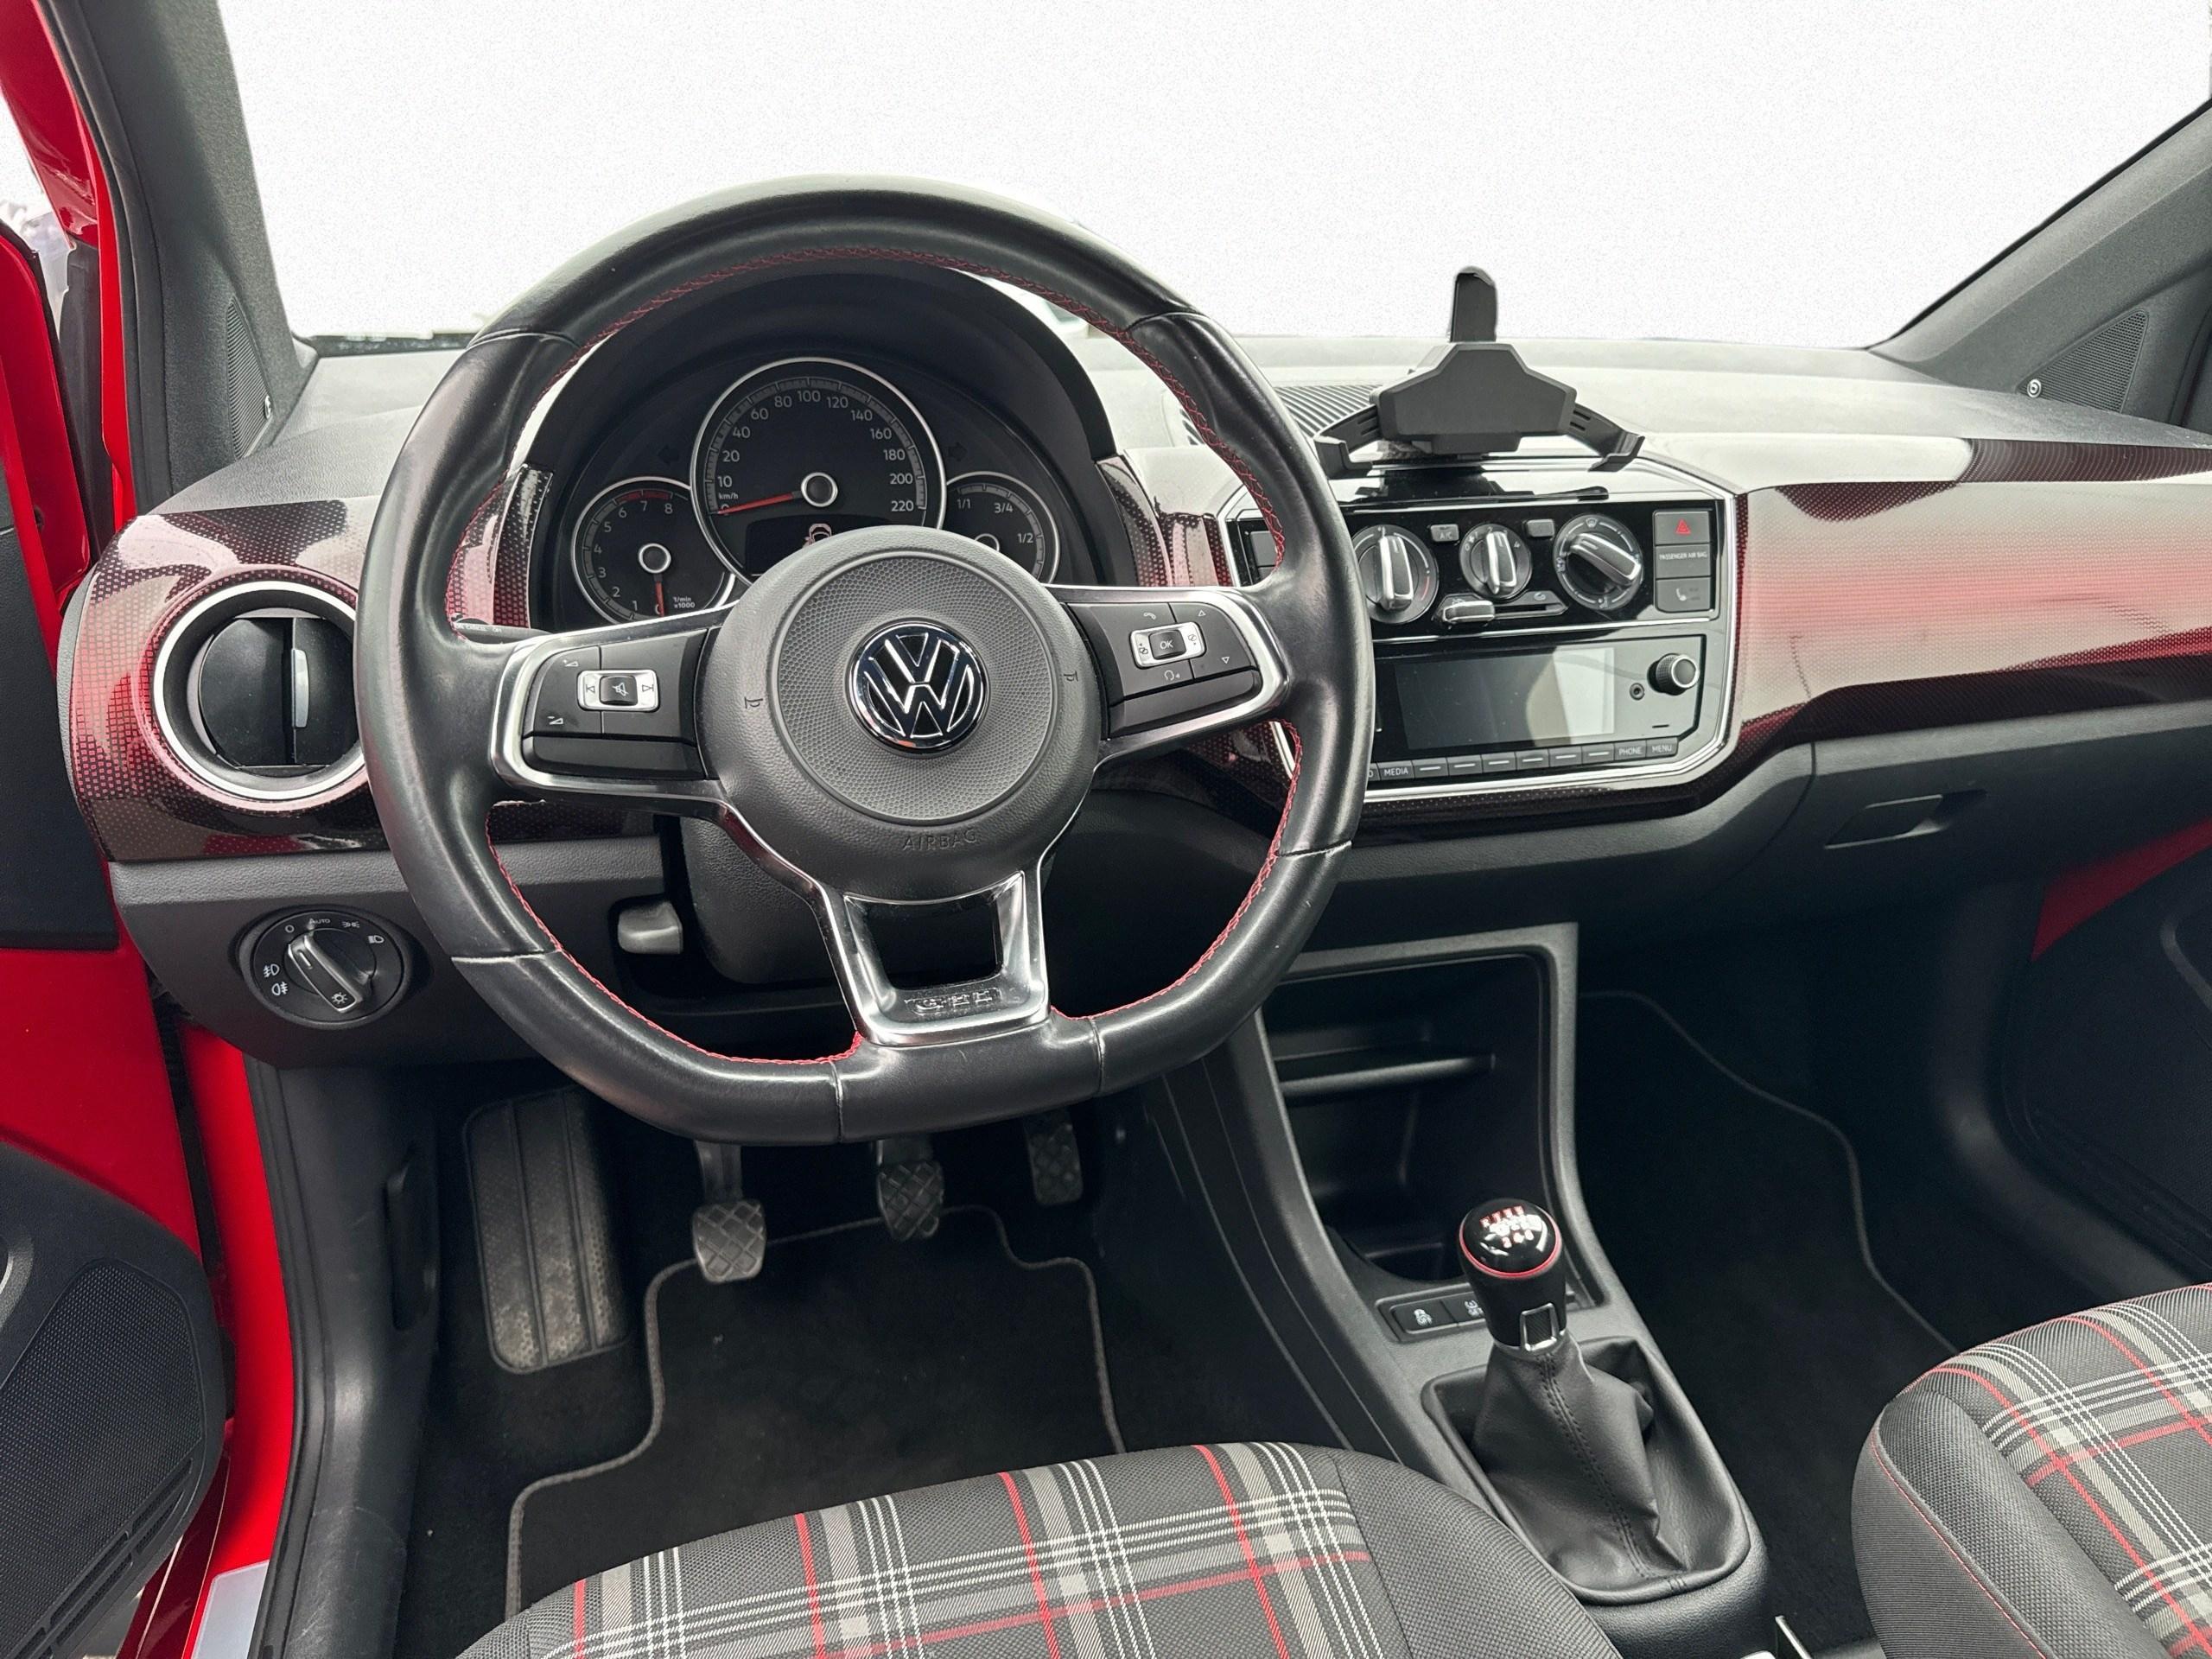 VW Up! 1.0 GTI beats SHZ DAB+ PDC maps+more 